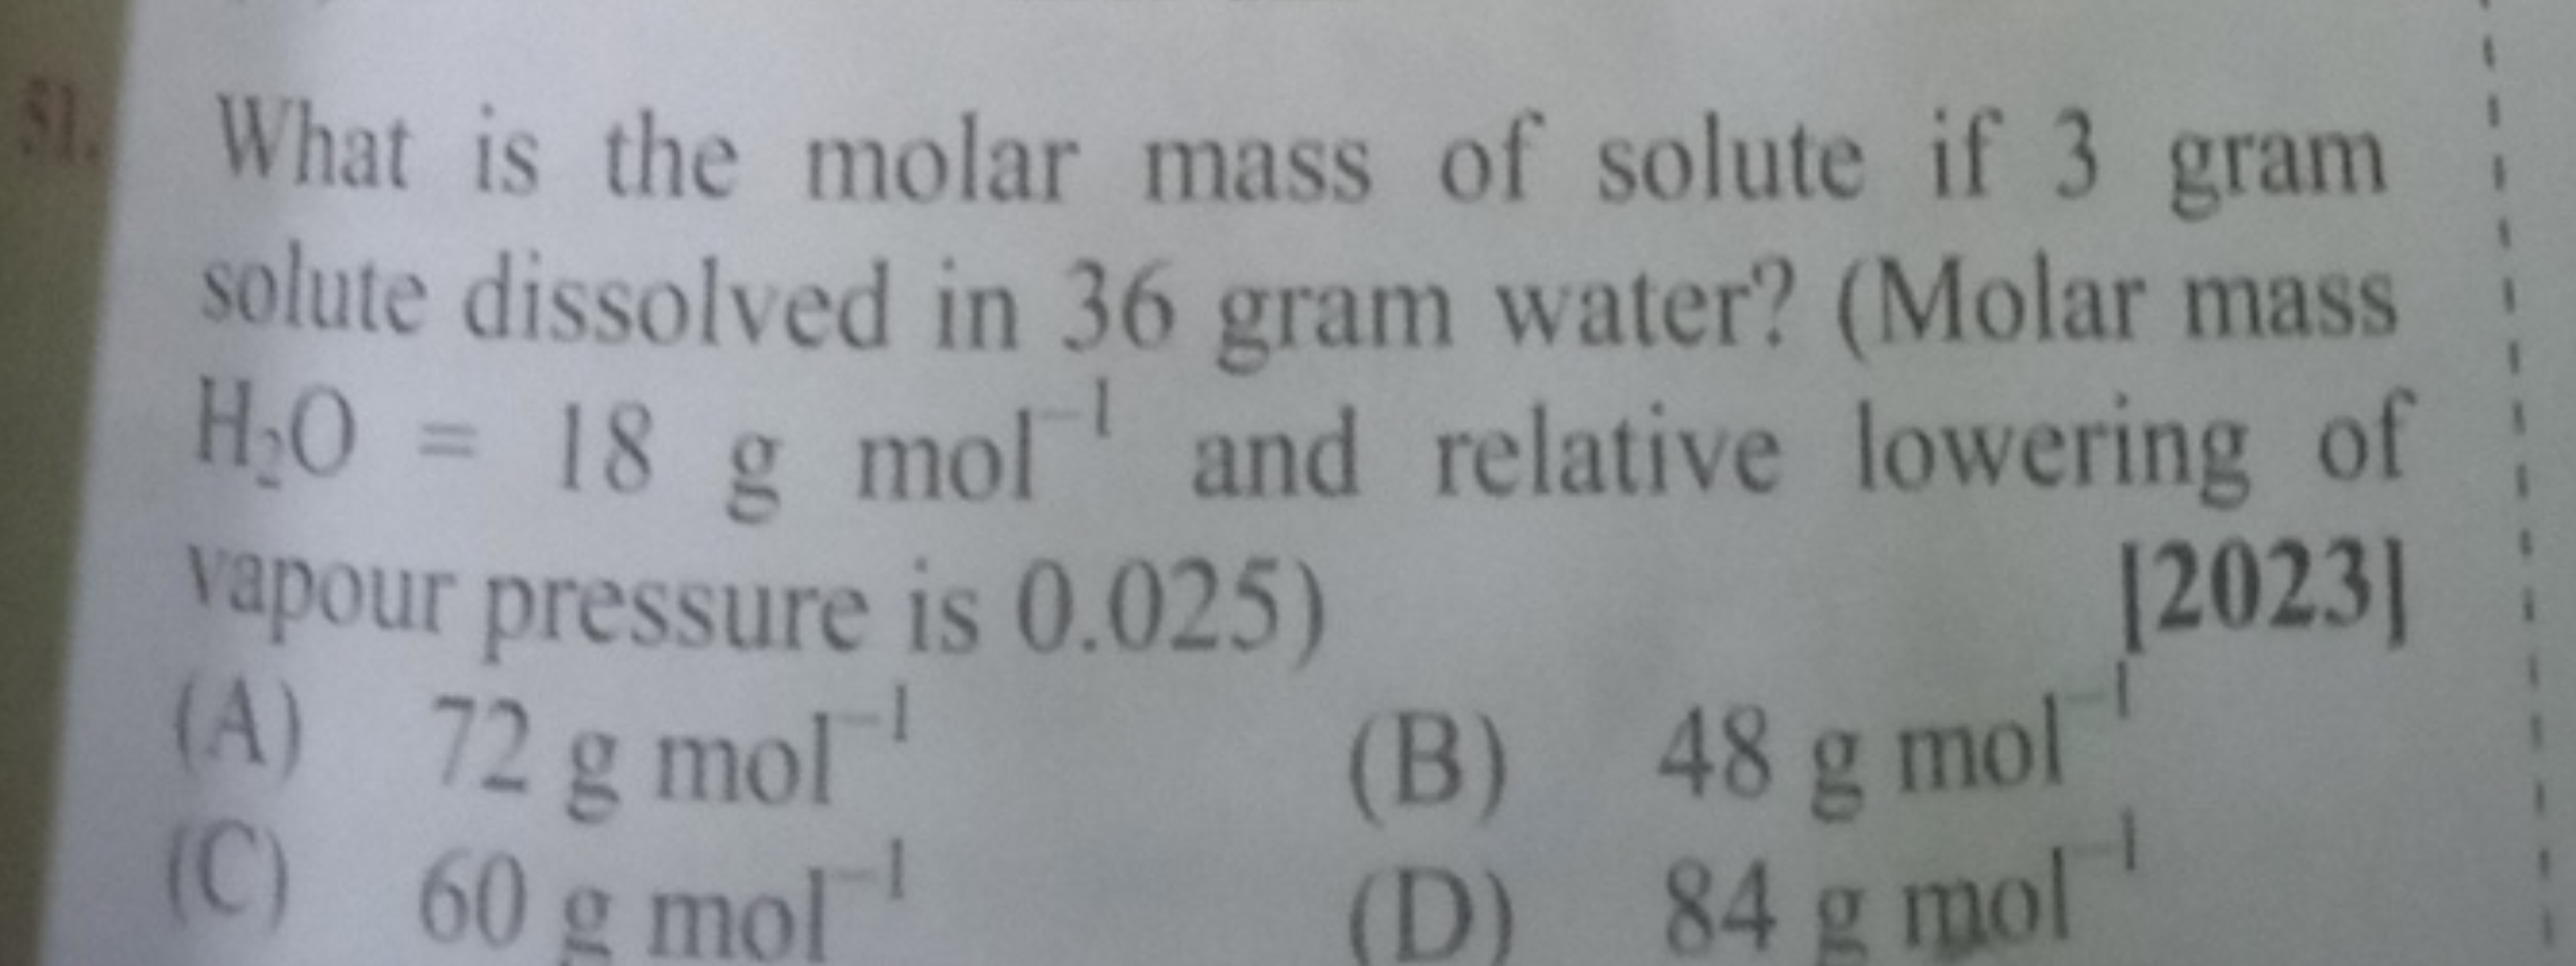 31. What is the molar mass of solute if 3 gram solute dissolved in 36 